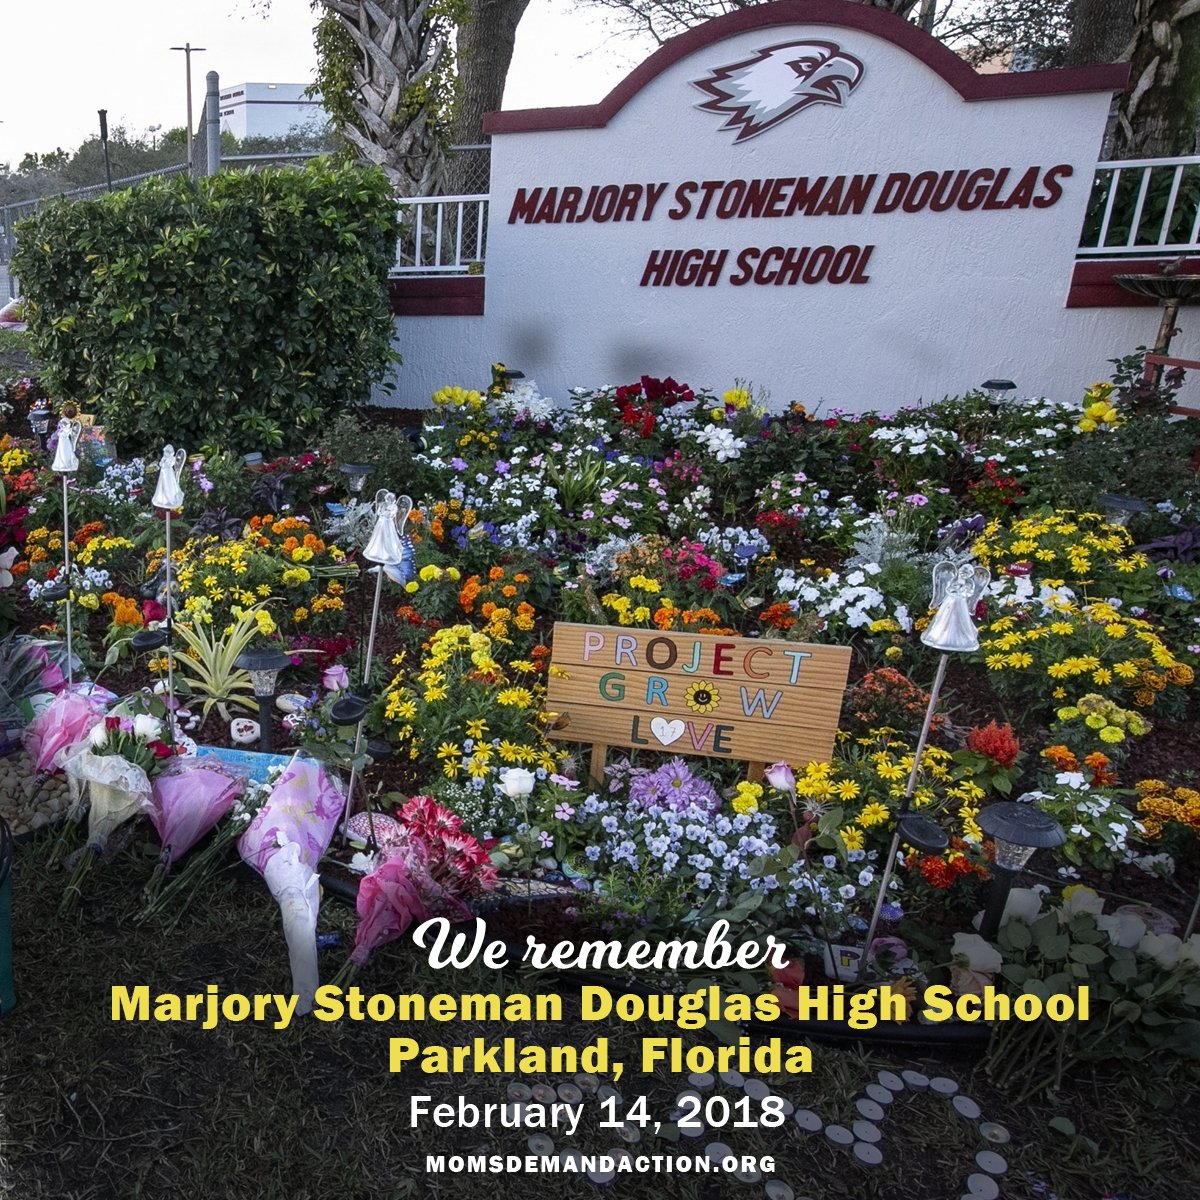 It’s been six years since 17 students and staff members were shot and killed and 17 more were wounded at Marjory Stoneman Douglas High School in Parkland, FL by a gunman armed with a Smith & Wesson AR-15. The tragic shooting moved an entire generation of young advocates and